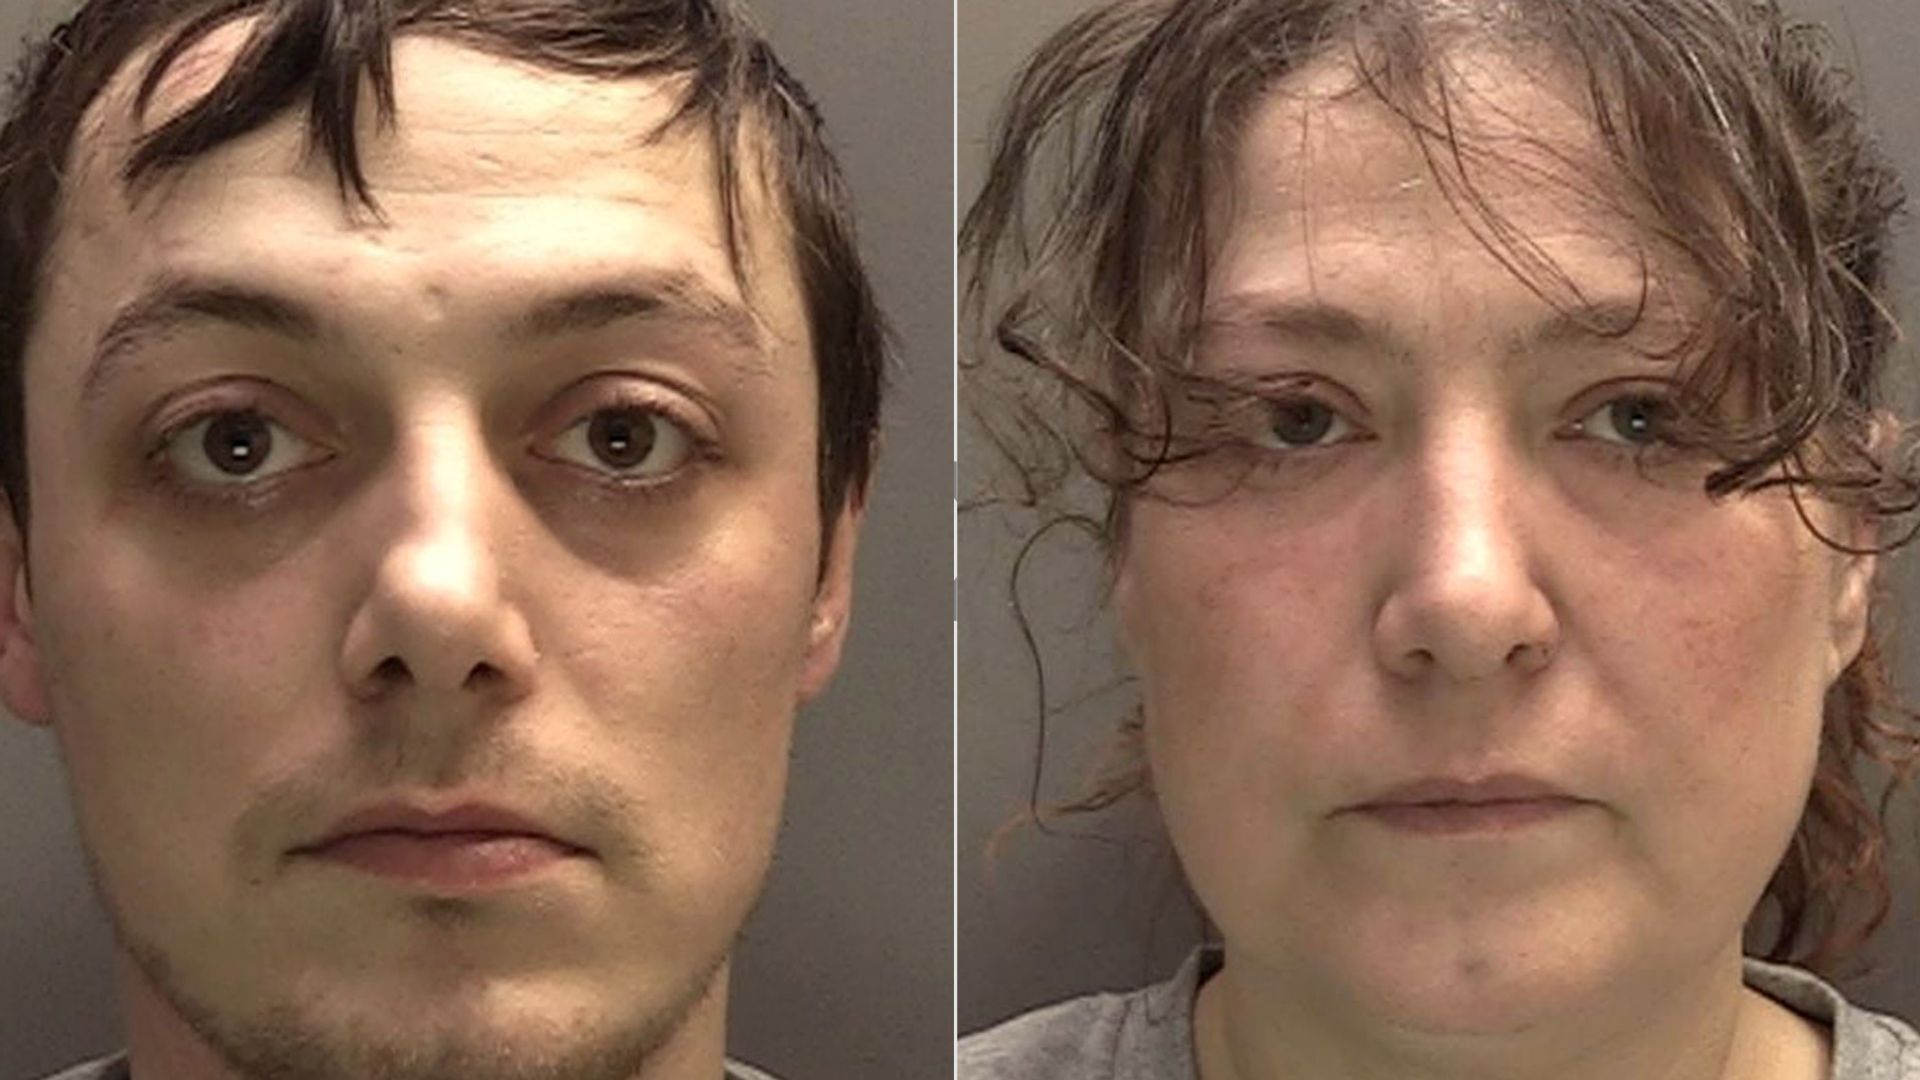 Mum and son jailed after XL bully attack on boy, 8